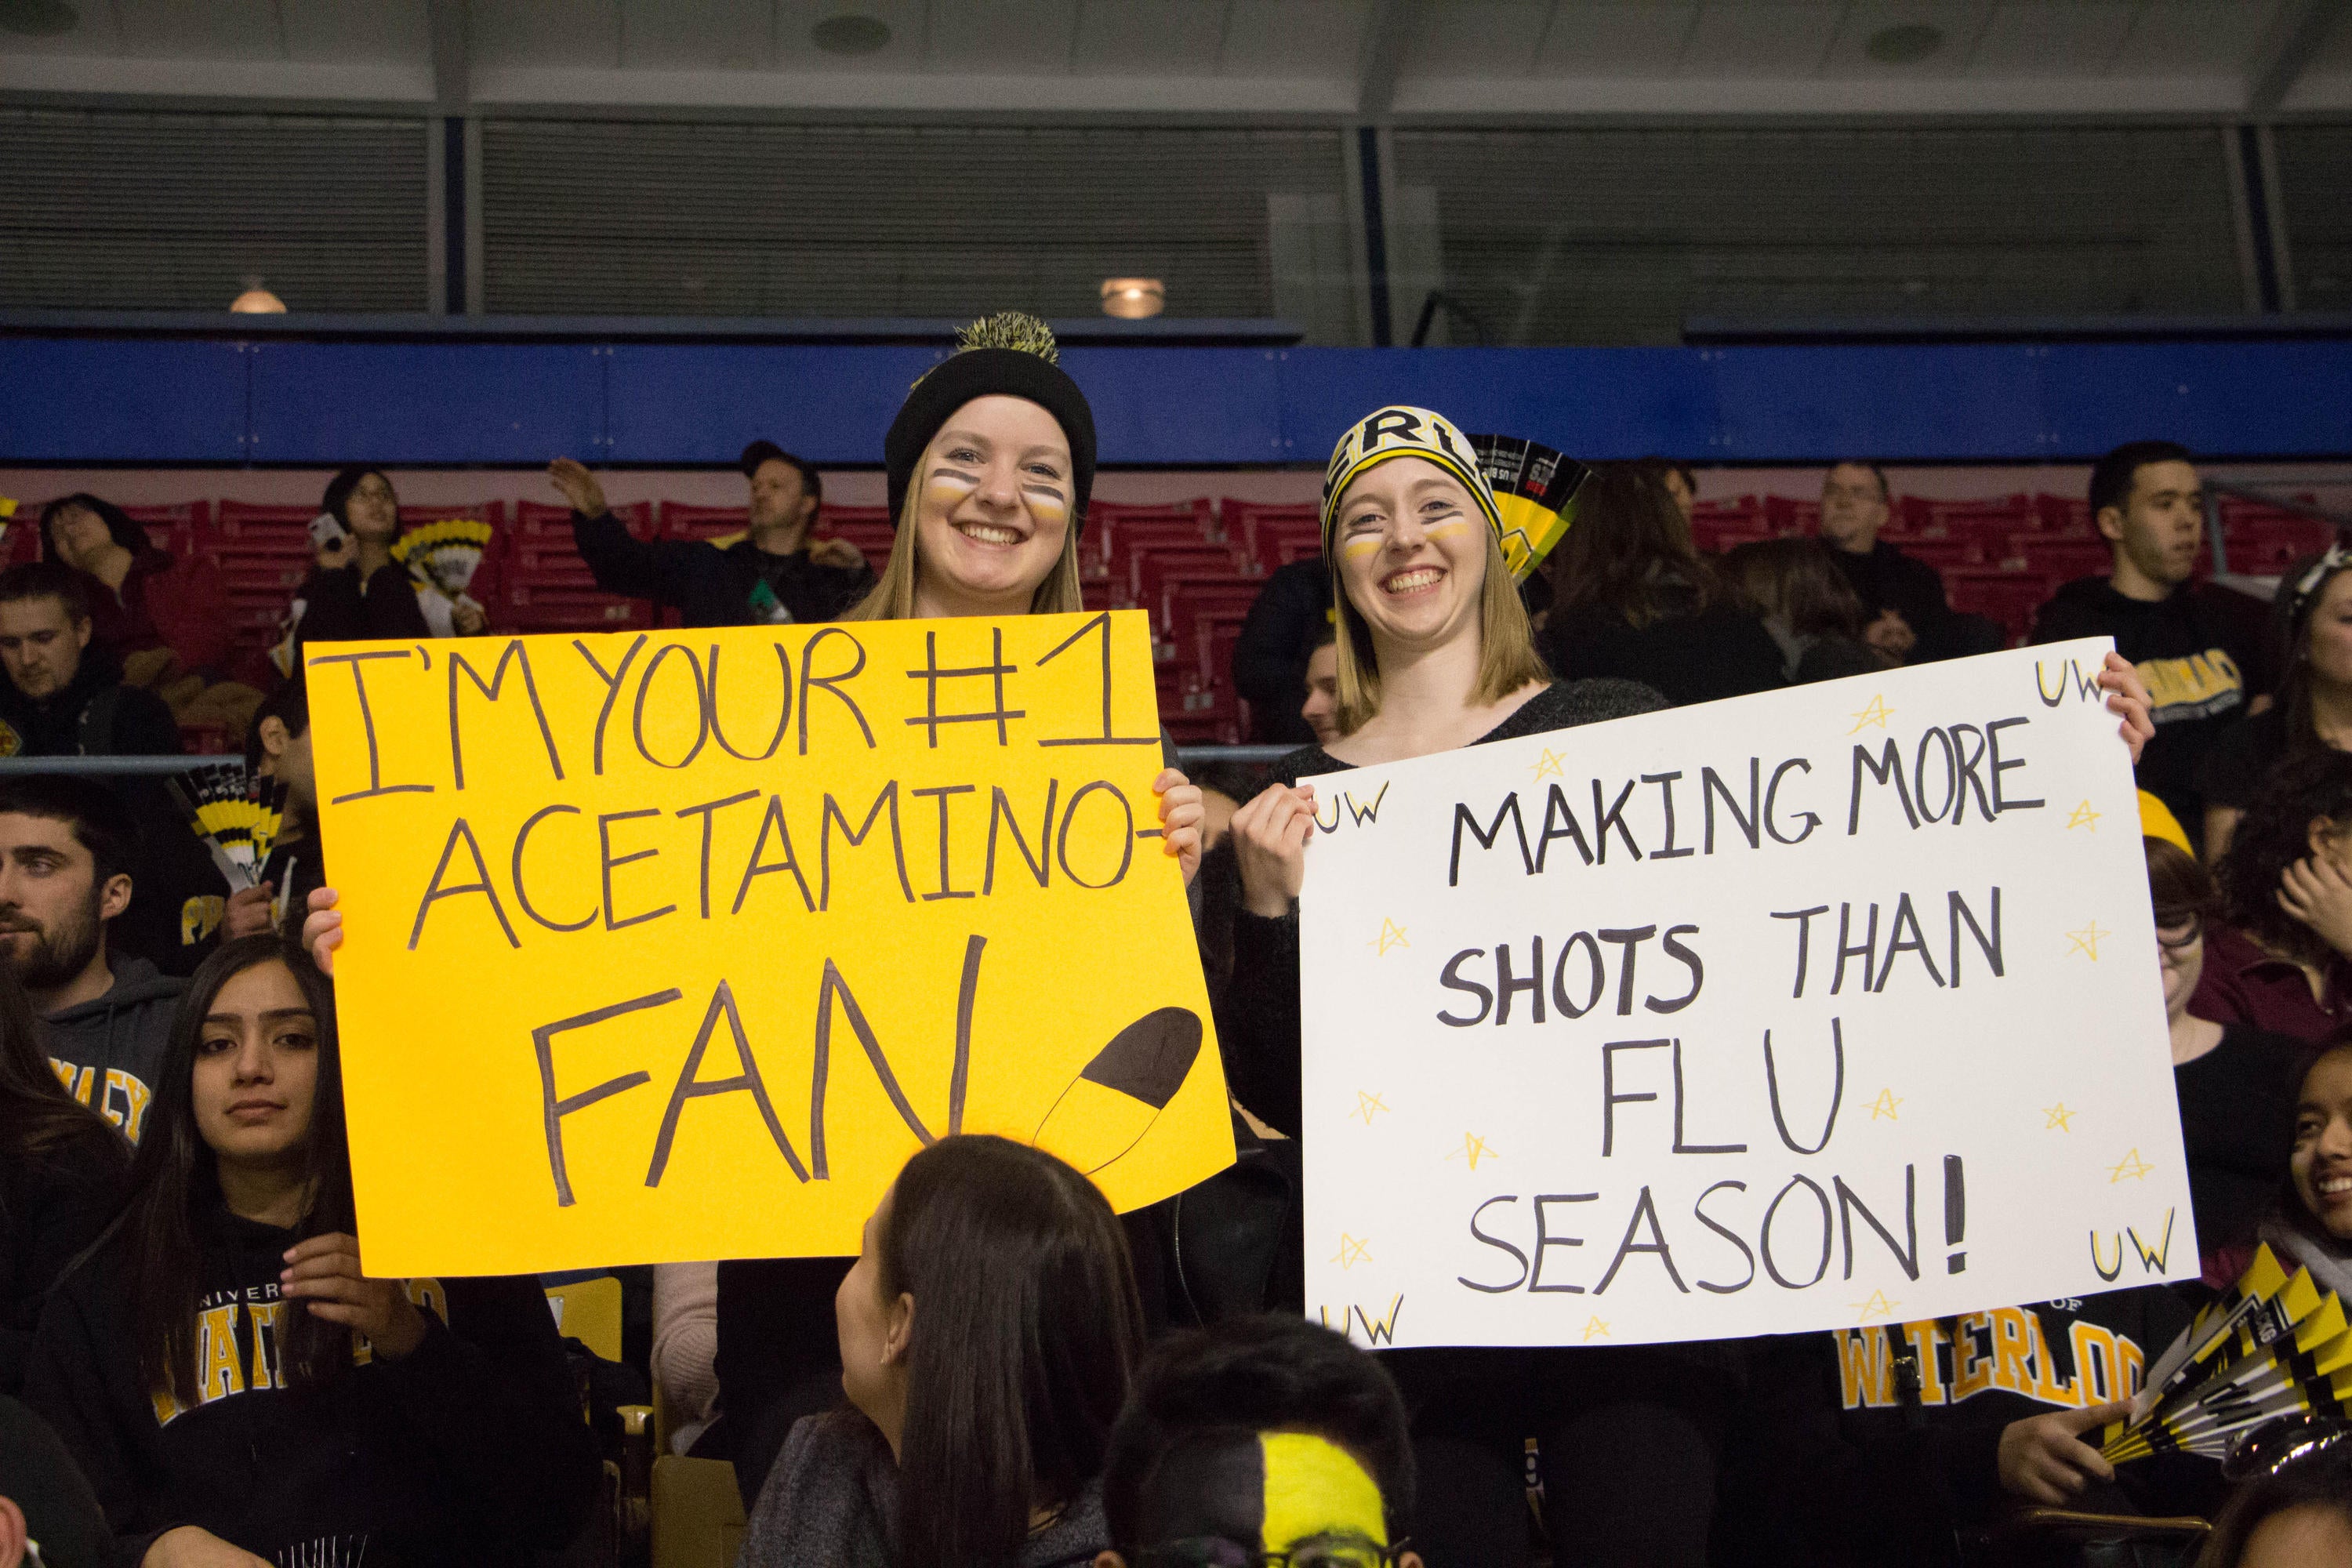 Fans with pharmacy themed signs